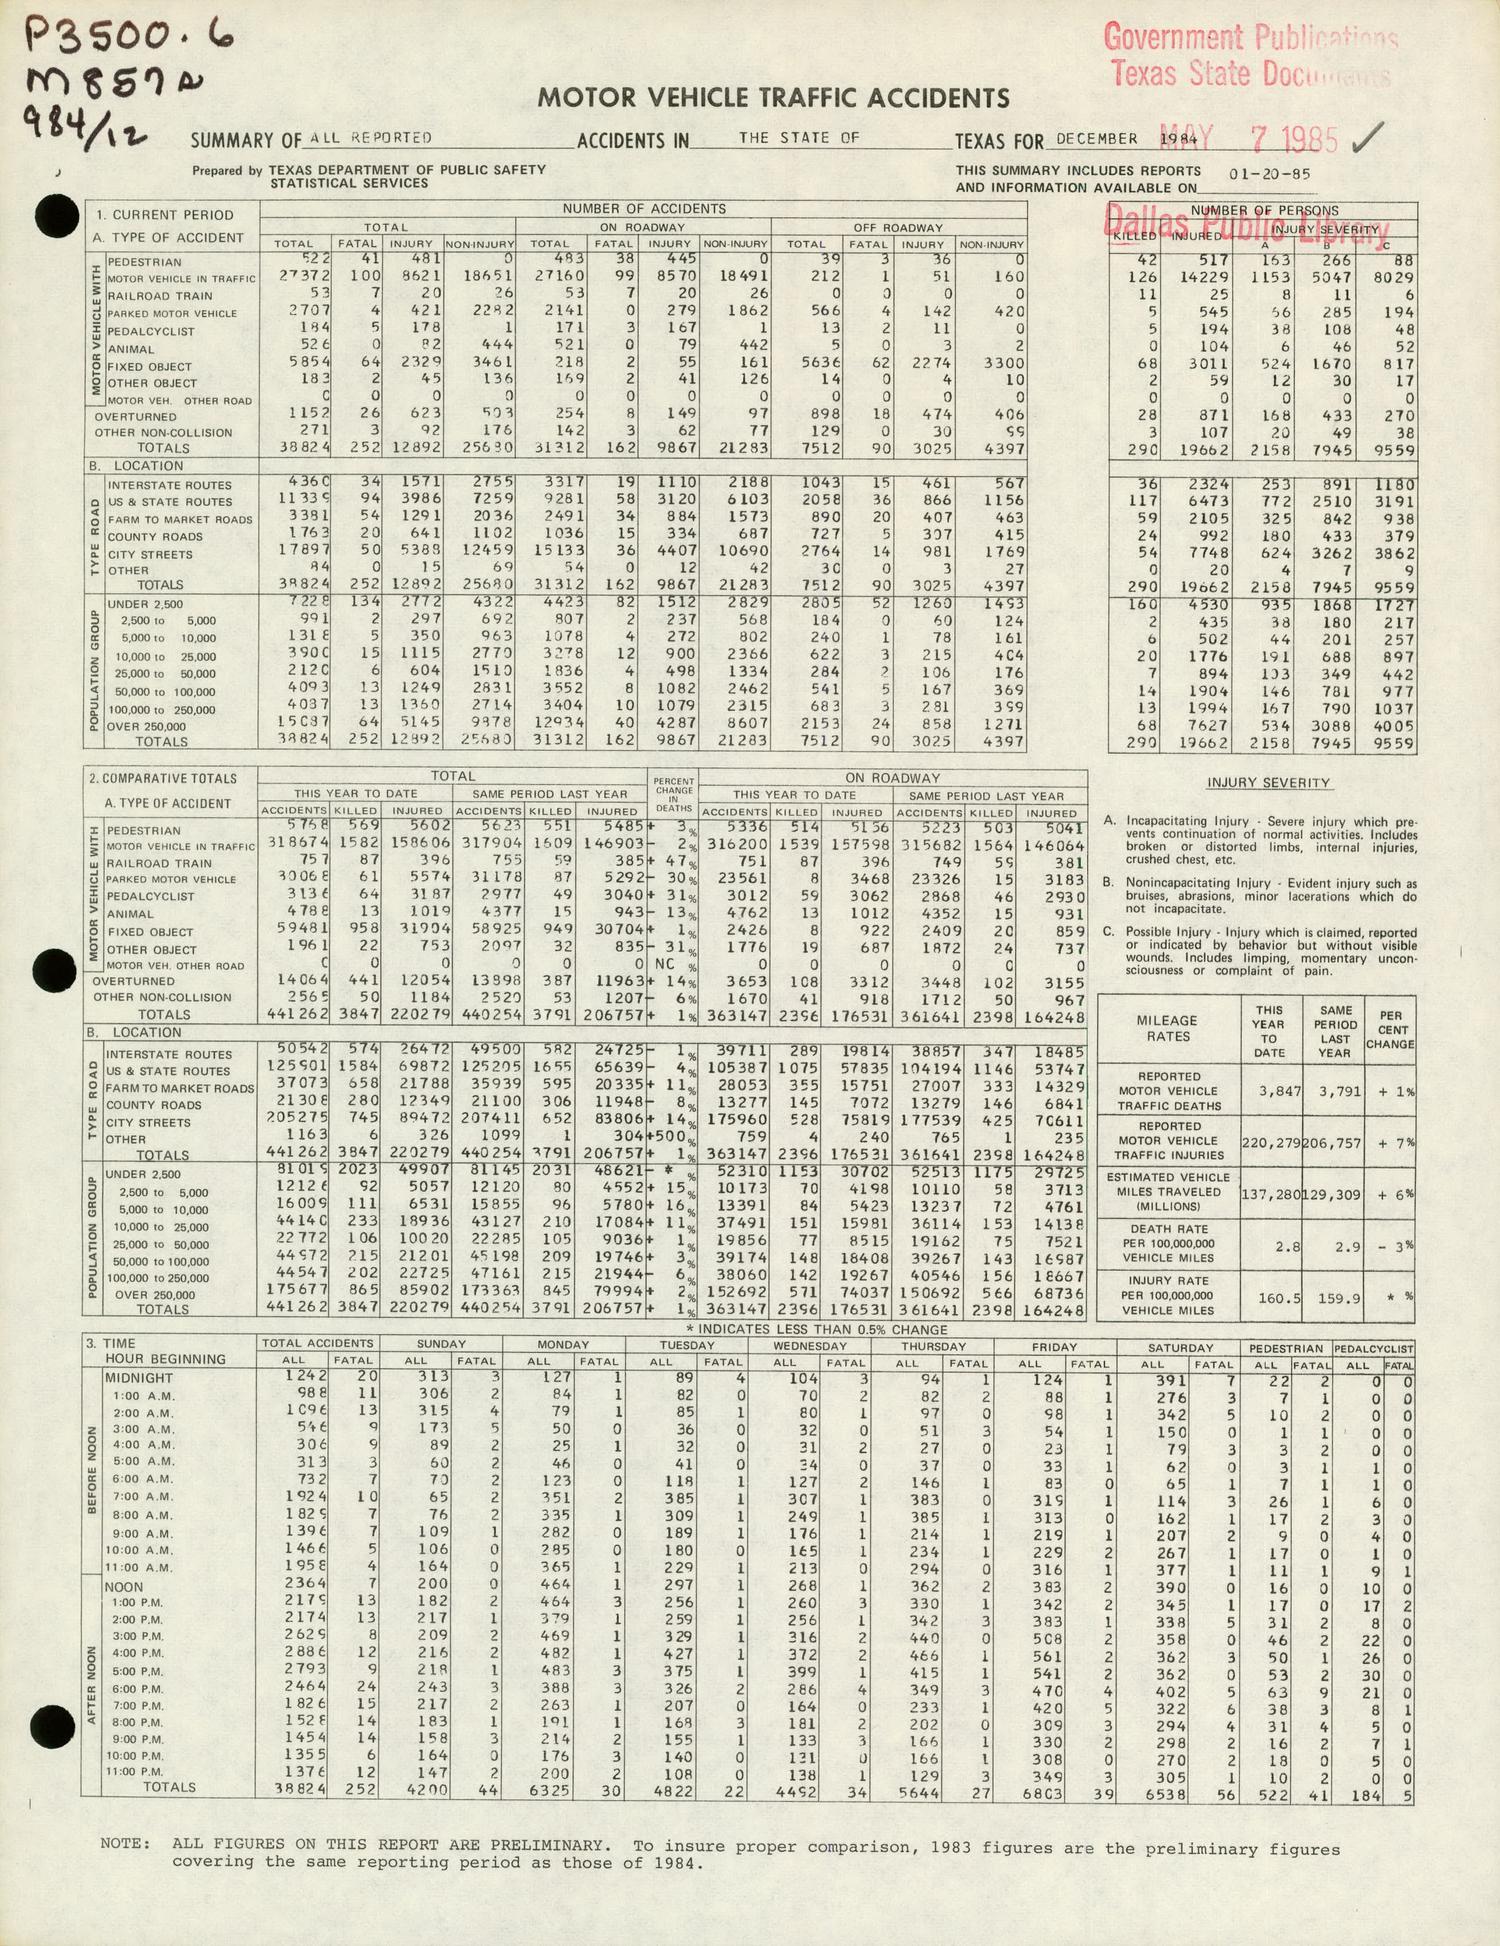 Summary of All Reported Accidents in the State of Texas for December 1984
                                                
                                                    FRONT COVER
                                                